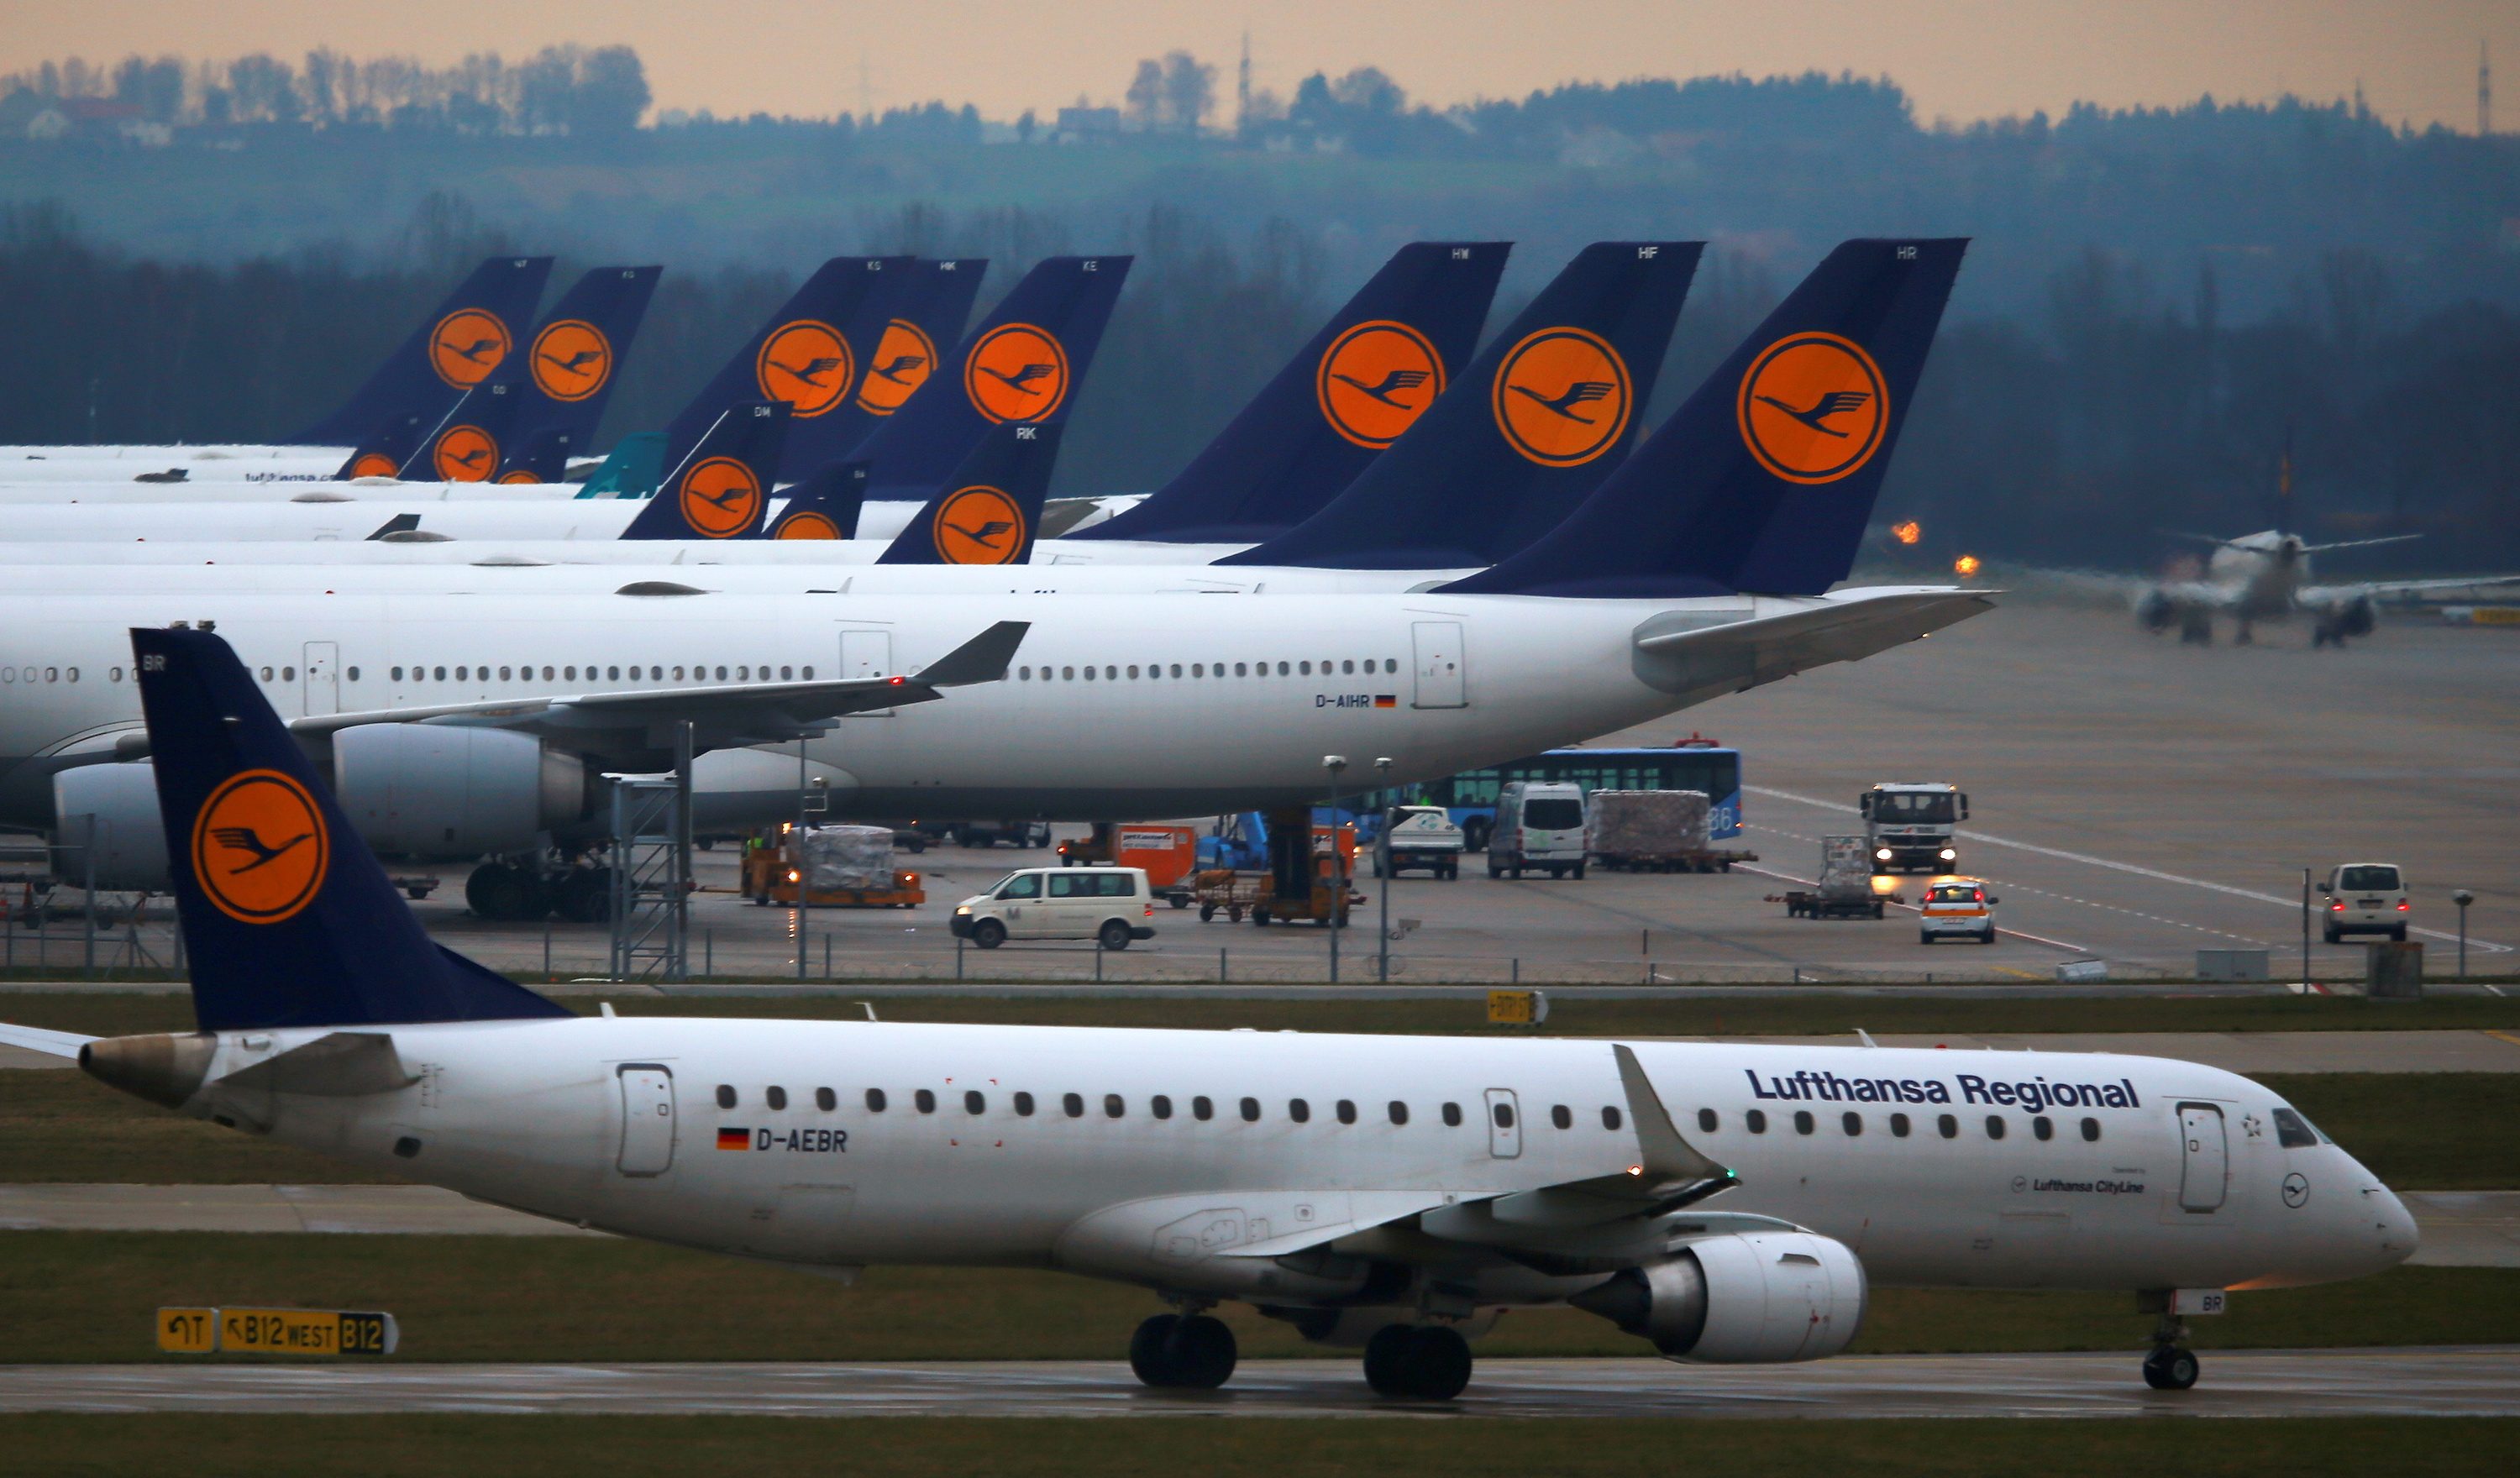 Lufthansa narrows loss on cost cuts, booking recovery